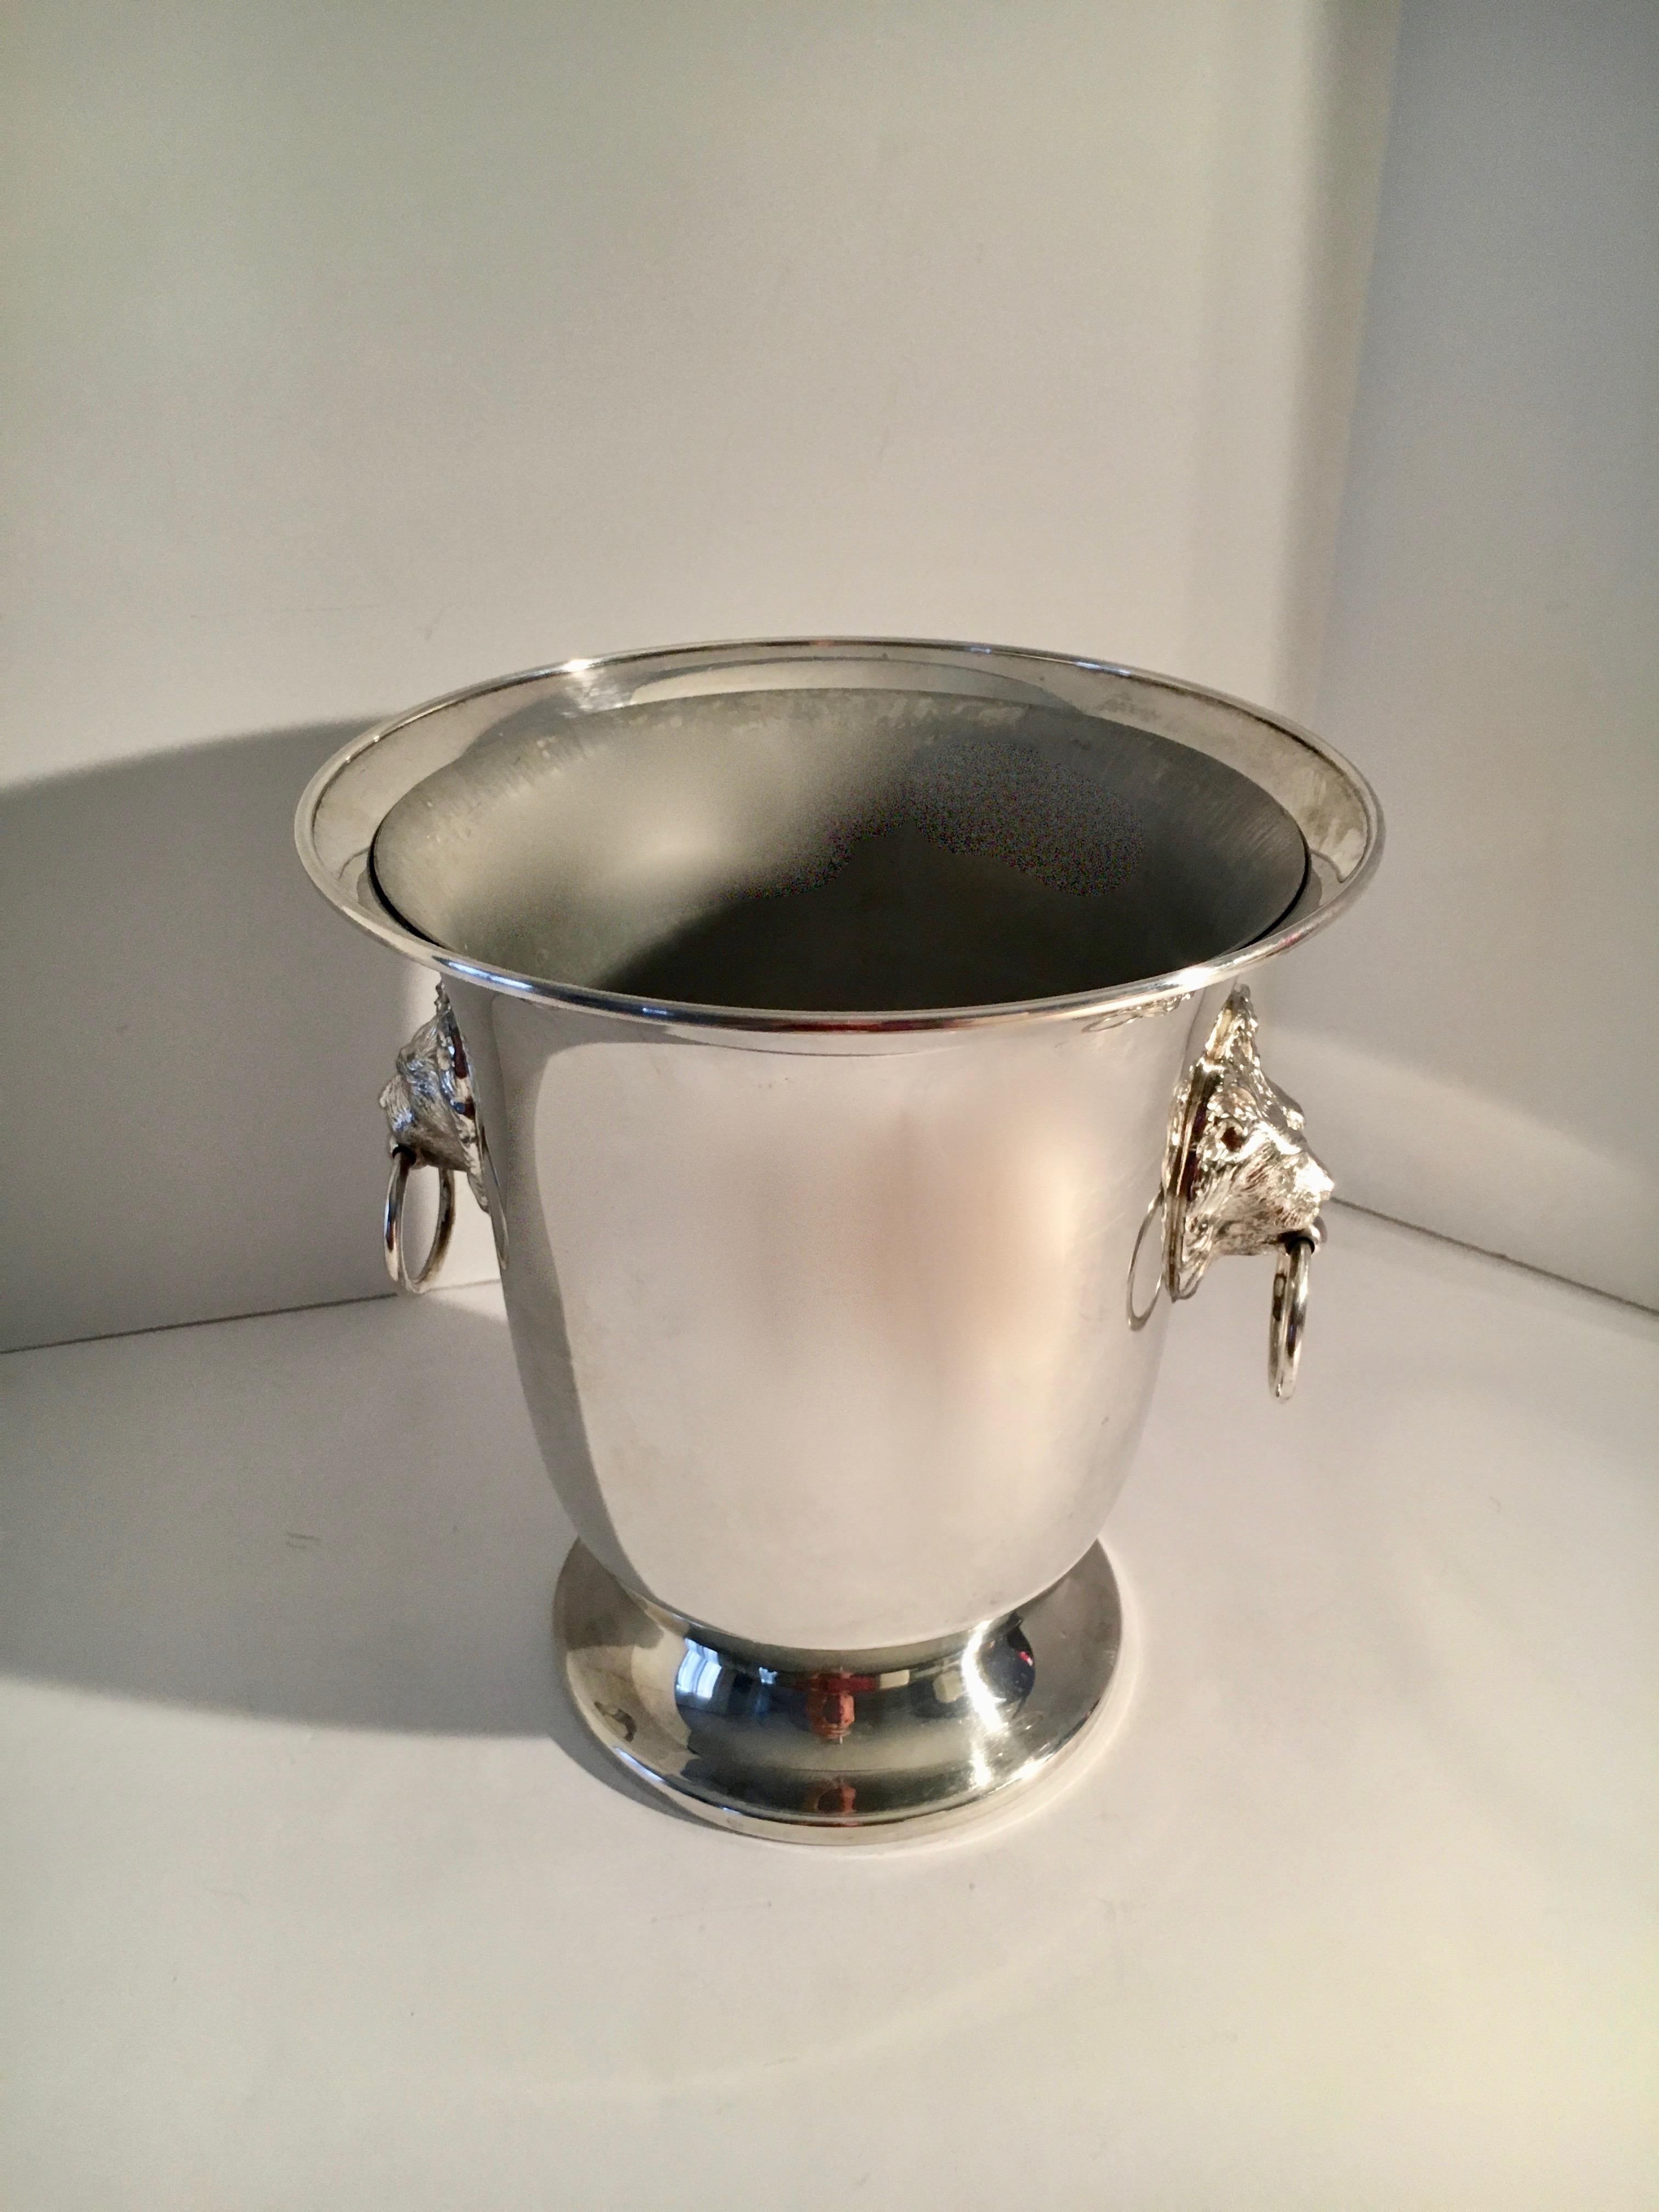 Sheffield silver plate champagne bucket with lion head handles - a stunning and impressive piece, ready for your next celebration. Carved lion head detailed handles for the most sophisticated bar!
Inside separate ice holder keeps your bar clean!